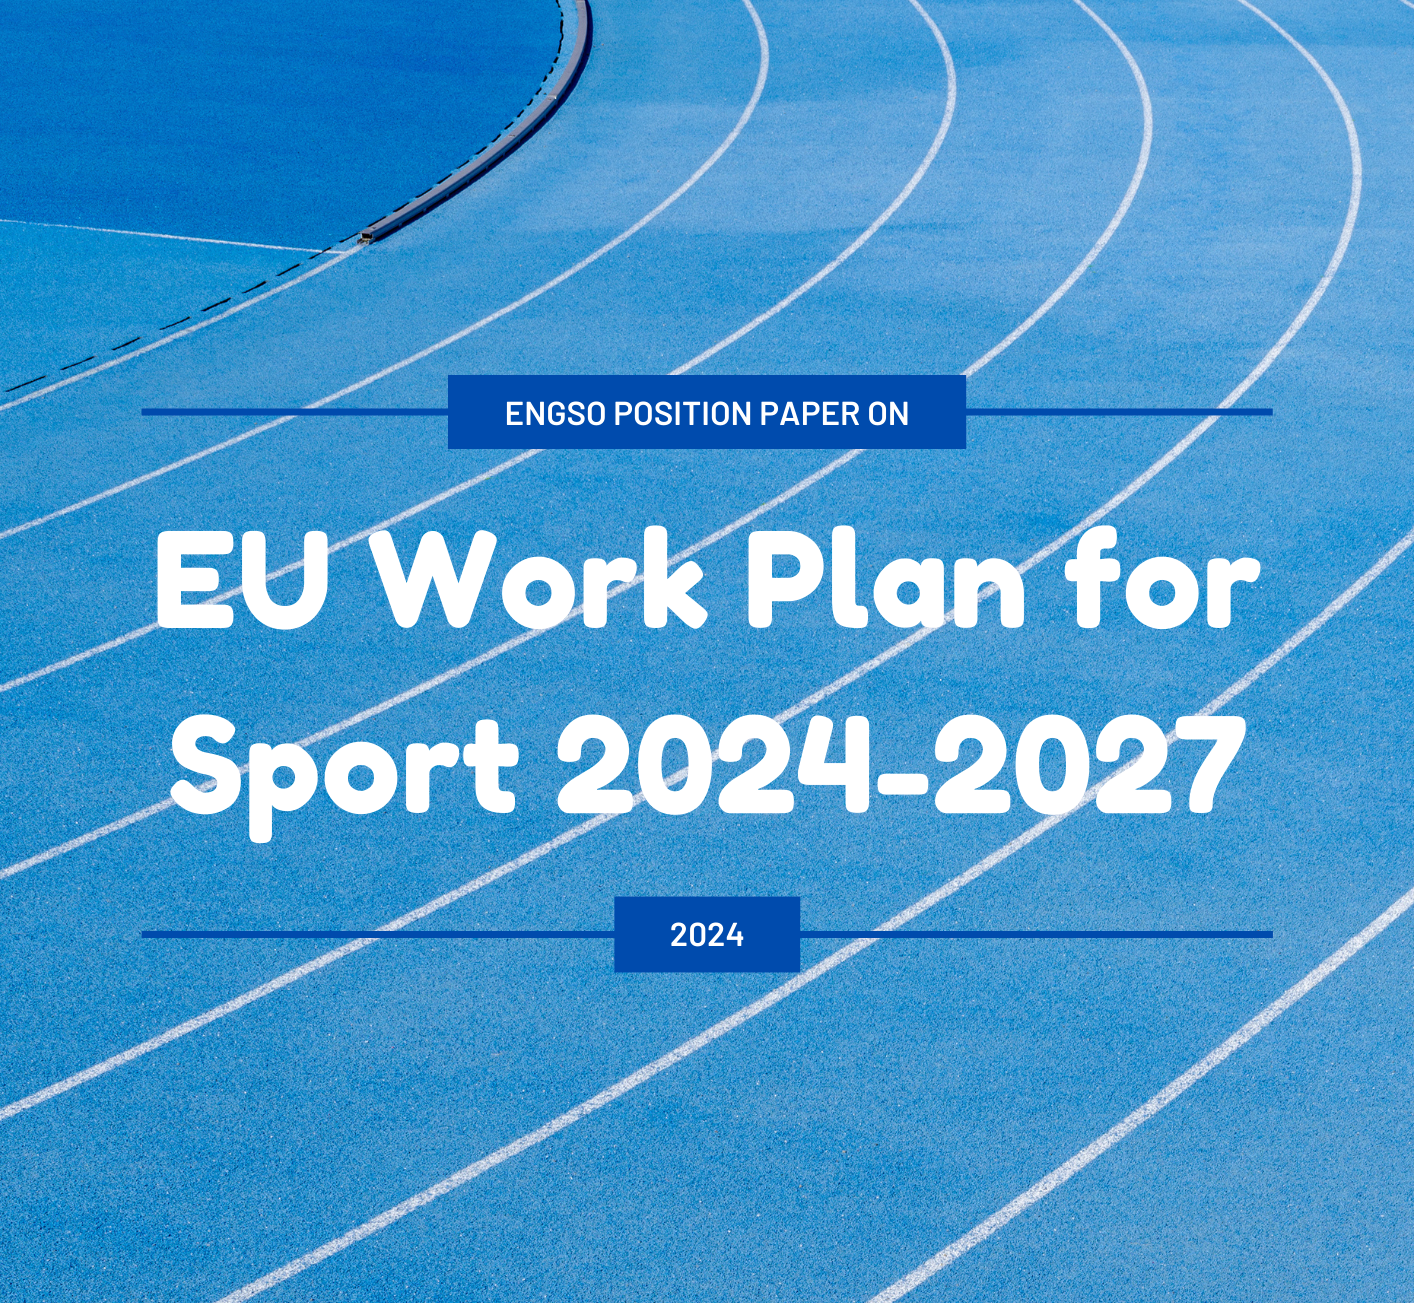 Position Paper On The Eu Work Plan For Sport Image 2024 2027